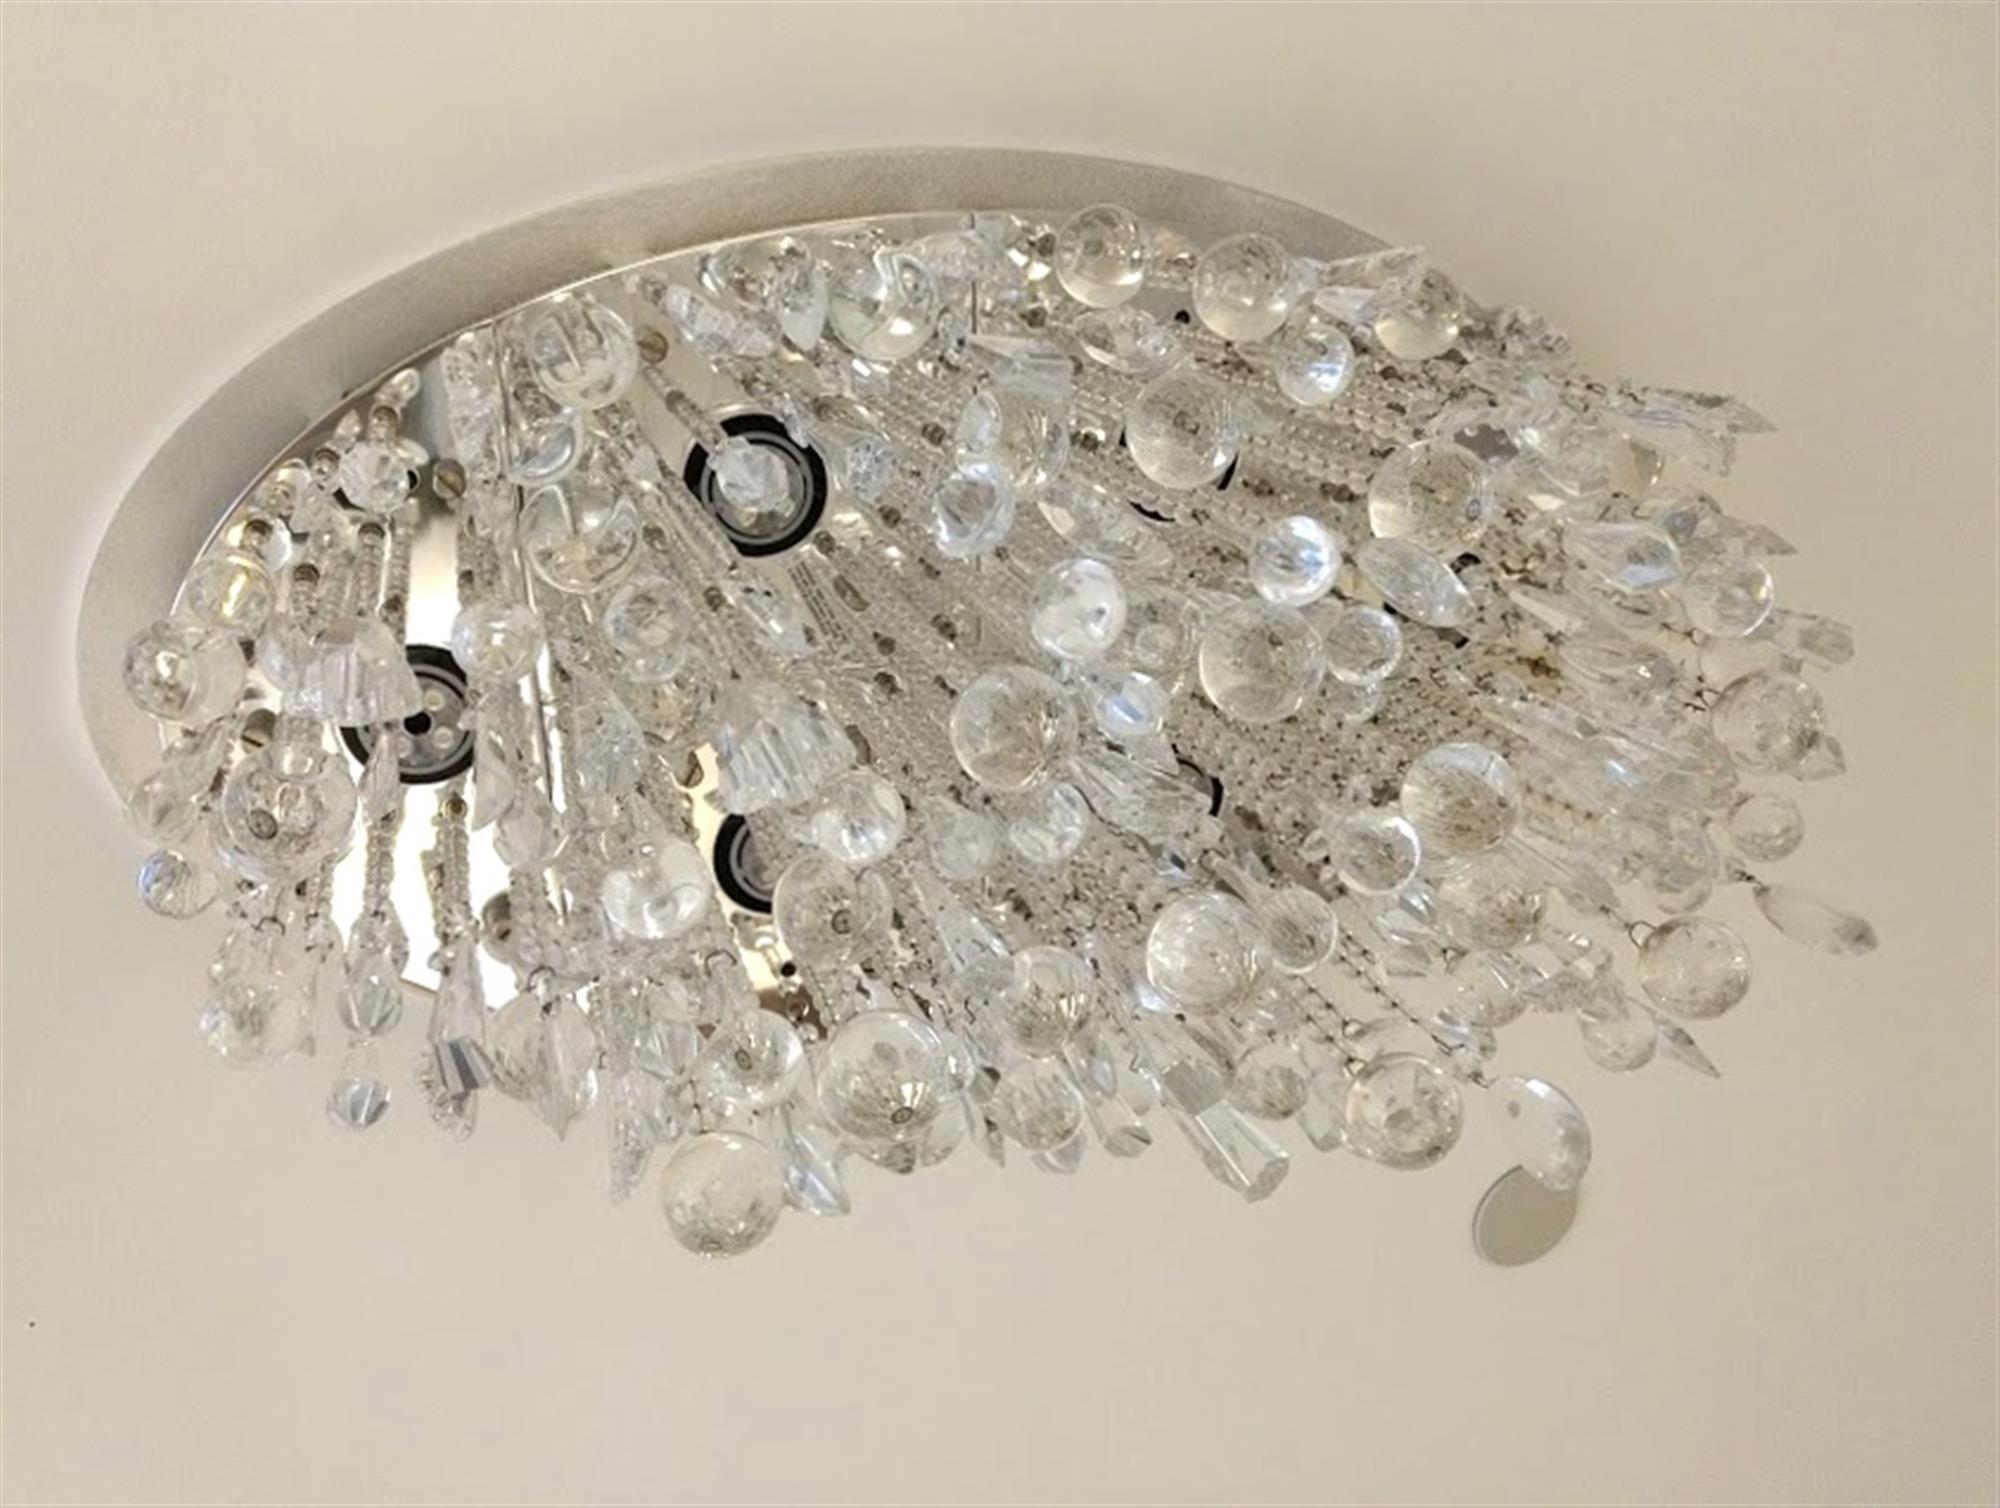 NYC Waldorf Astoria Hotel flush mount ceiling fixture with crystal pendeloques and prisms that drape from an oval satin nickel mesh frame by designer Todd Rugee. Retrieved from the 19th floor health spa in the Waldorf Astoria during the most recent